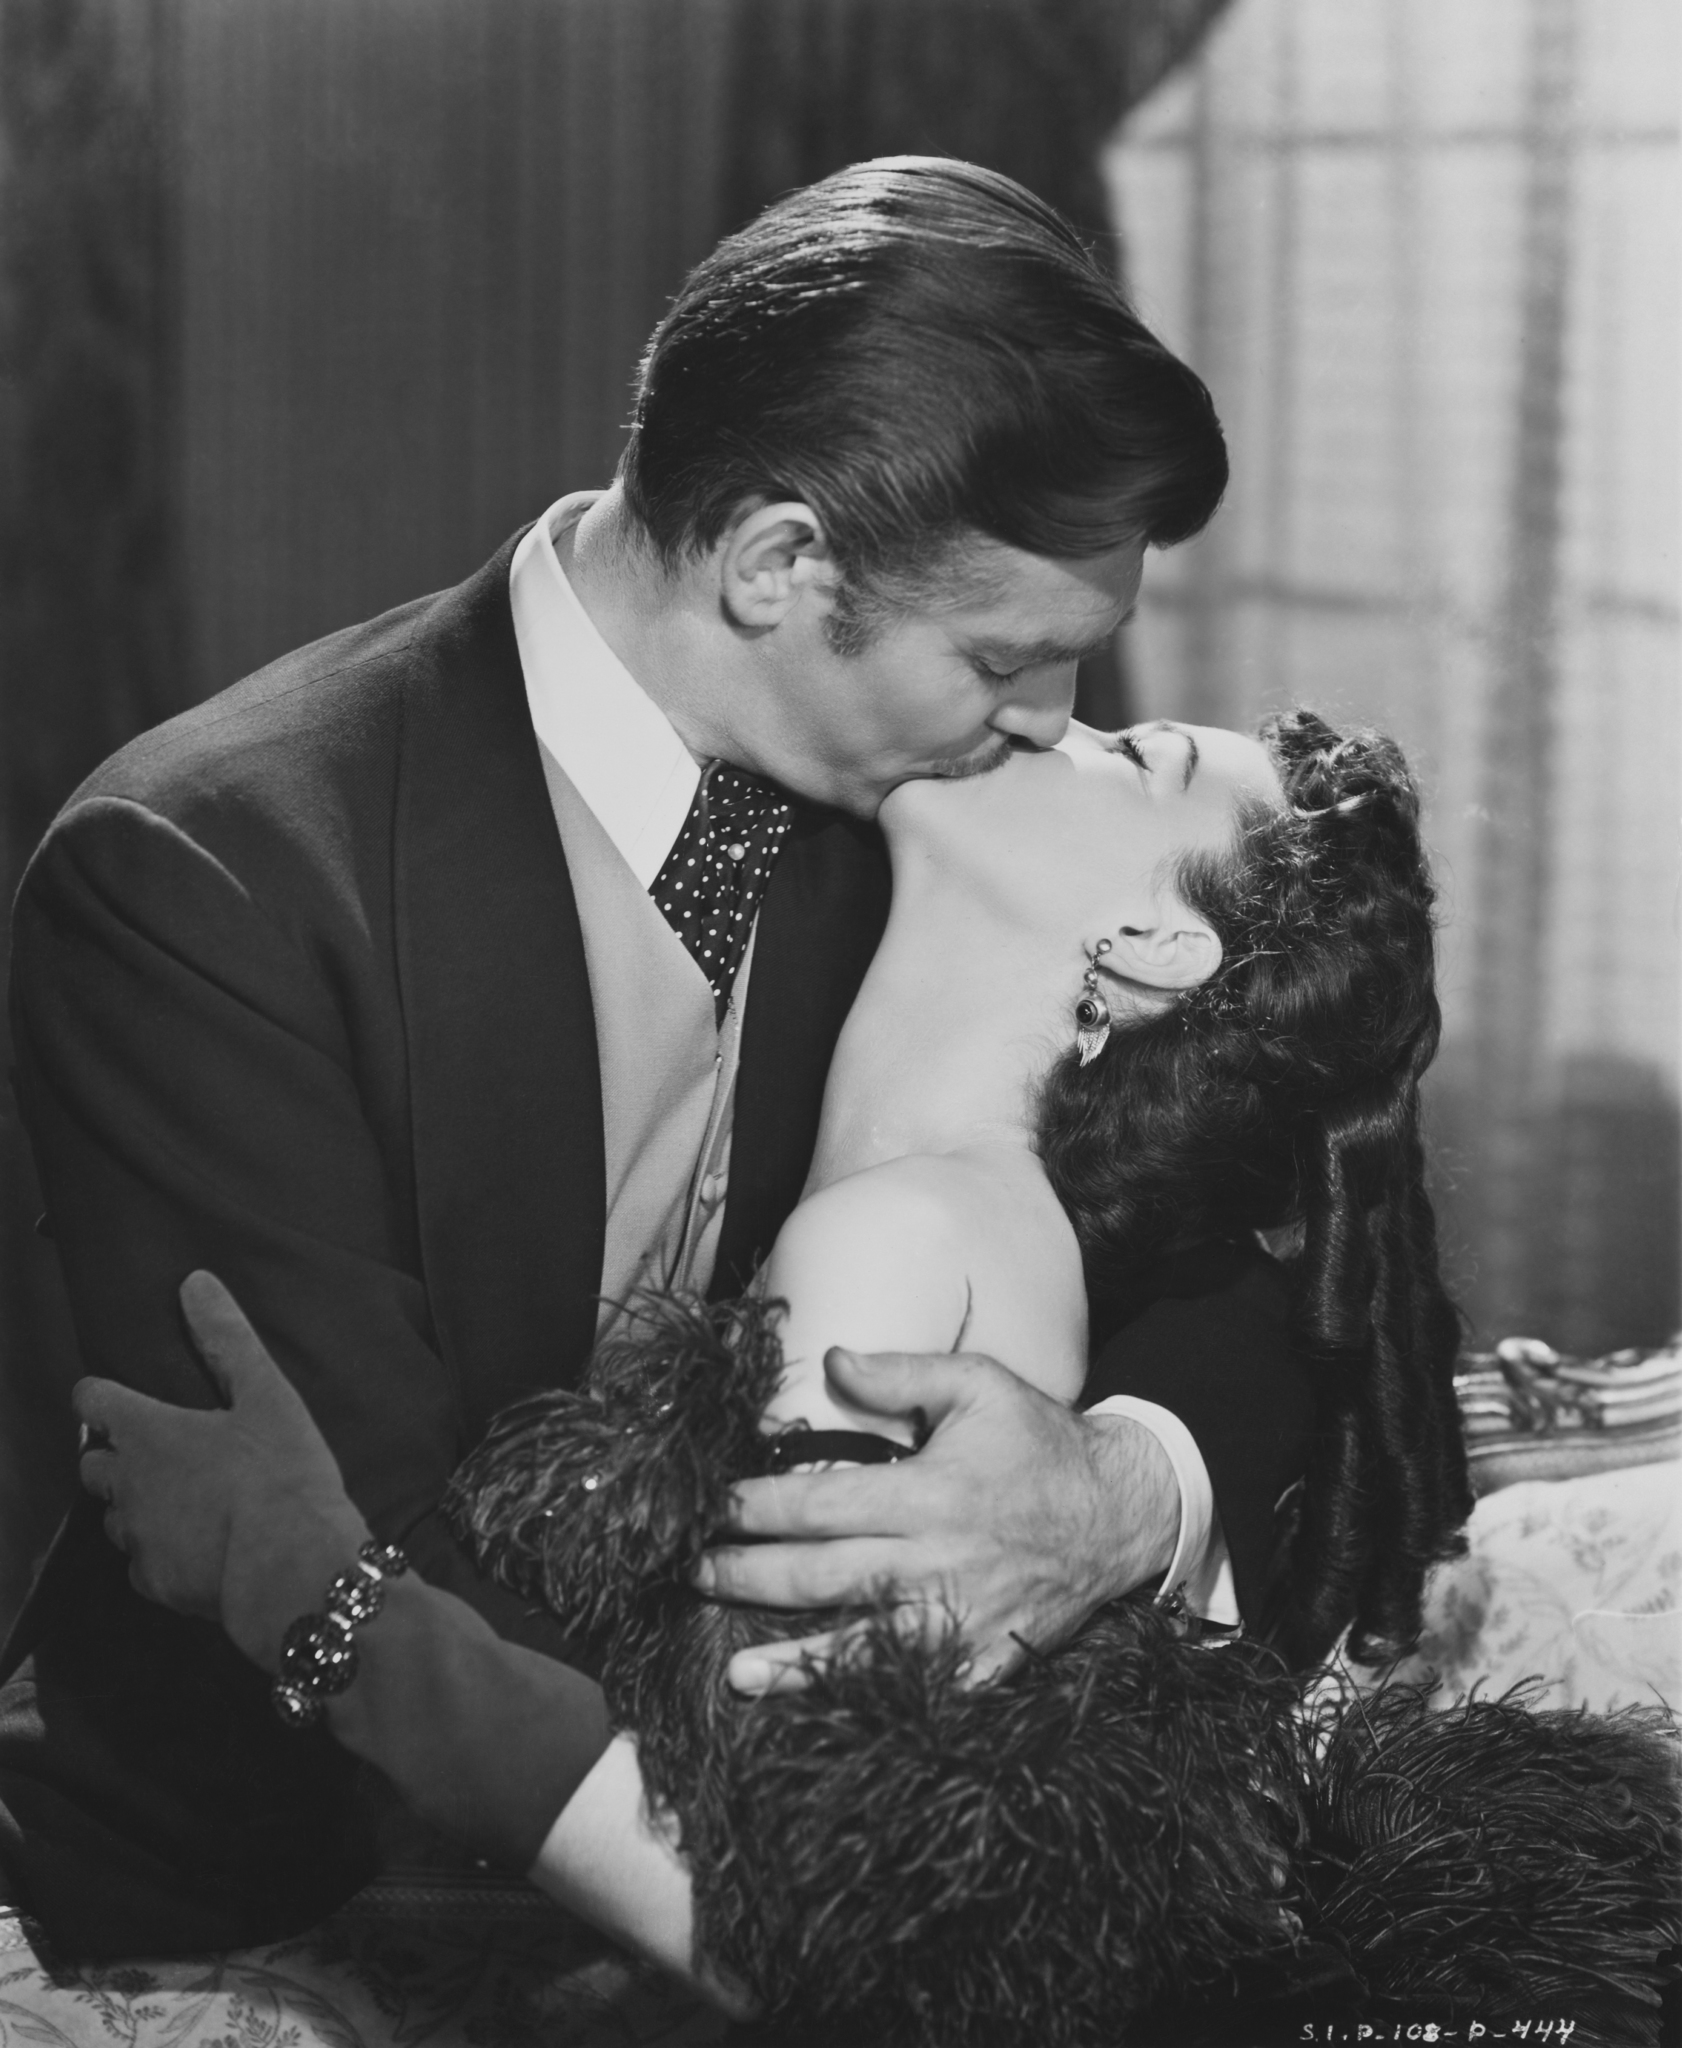 Clark Gable and Vivien Leigh in Gone with the Wind (1939)